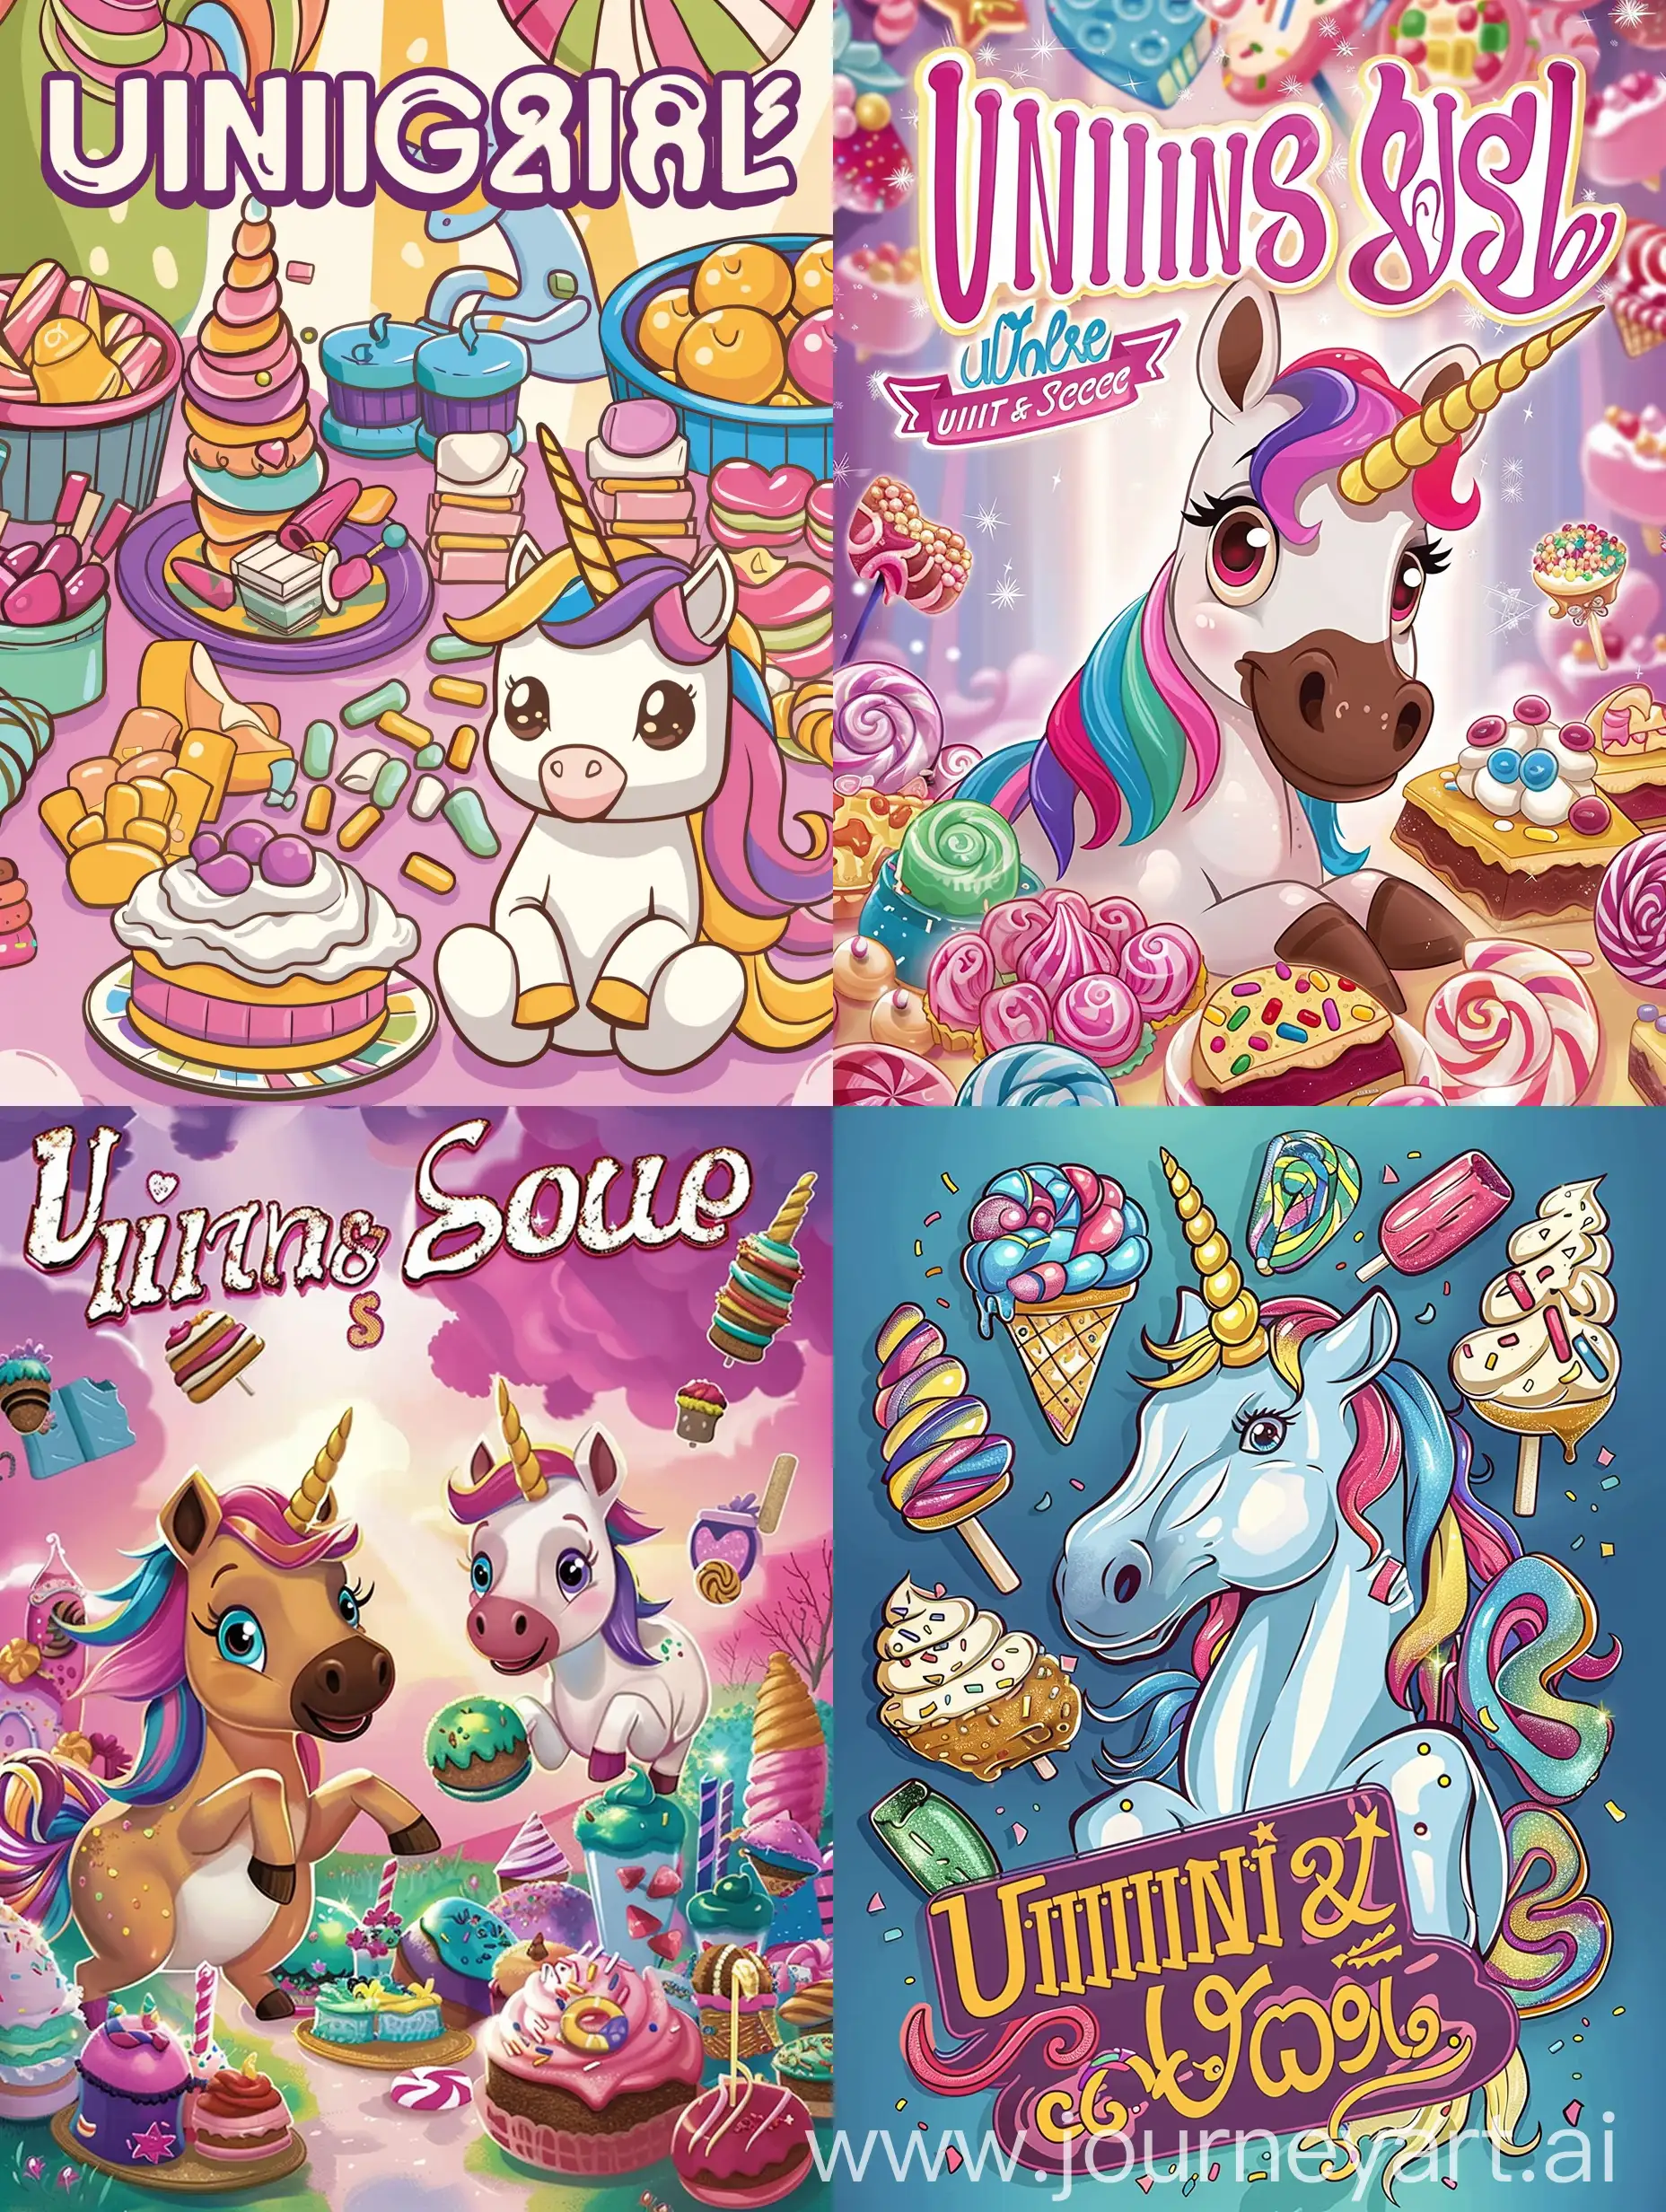 Cover of a computer game, world of sweets, unicorn, cute, children's, inscription "Unicorn and Sweets"